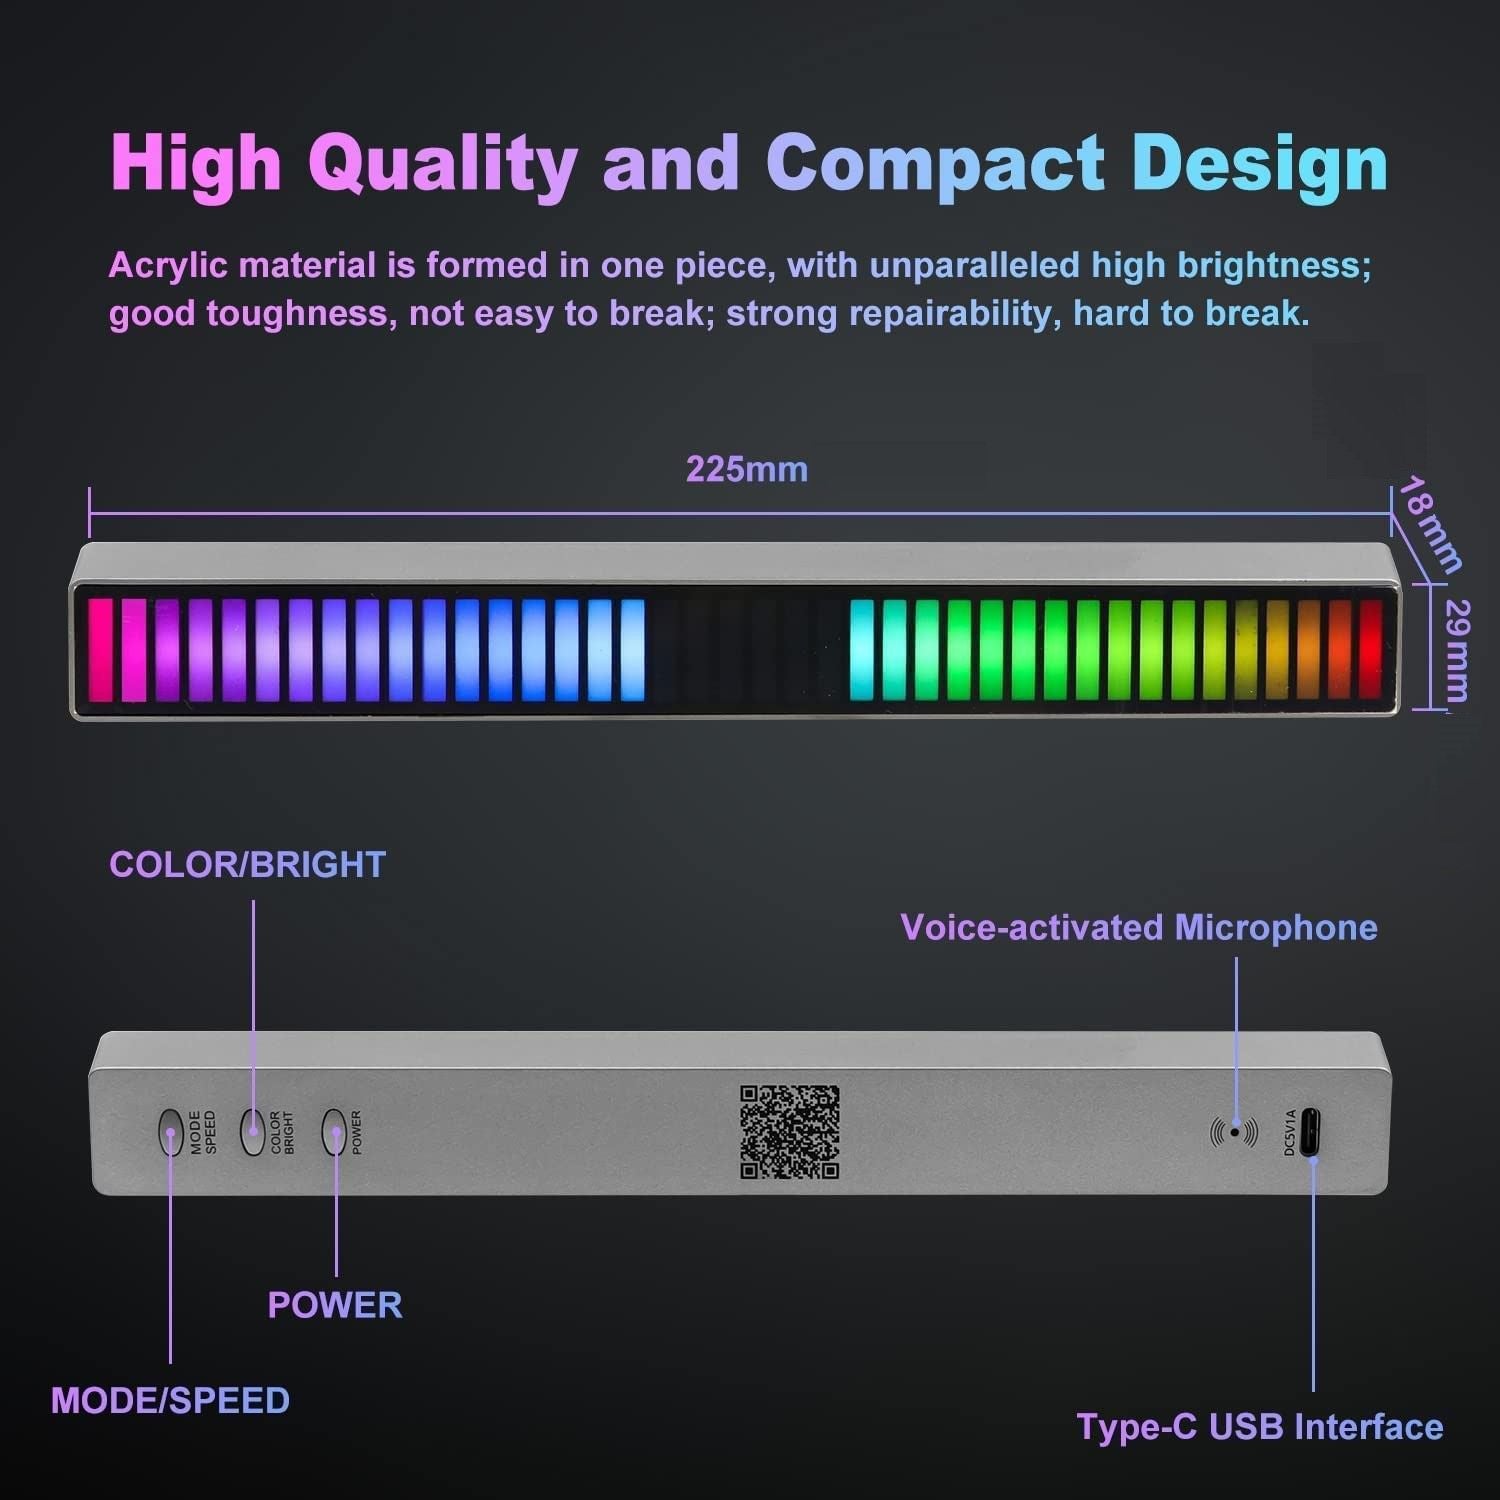 Smart Colorful RGB Music Sync Light Bar with App Control for Gaming, TV and Party (1 Piece)